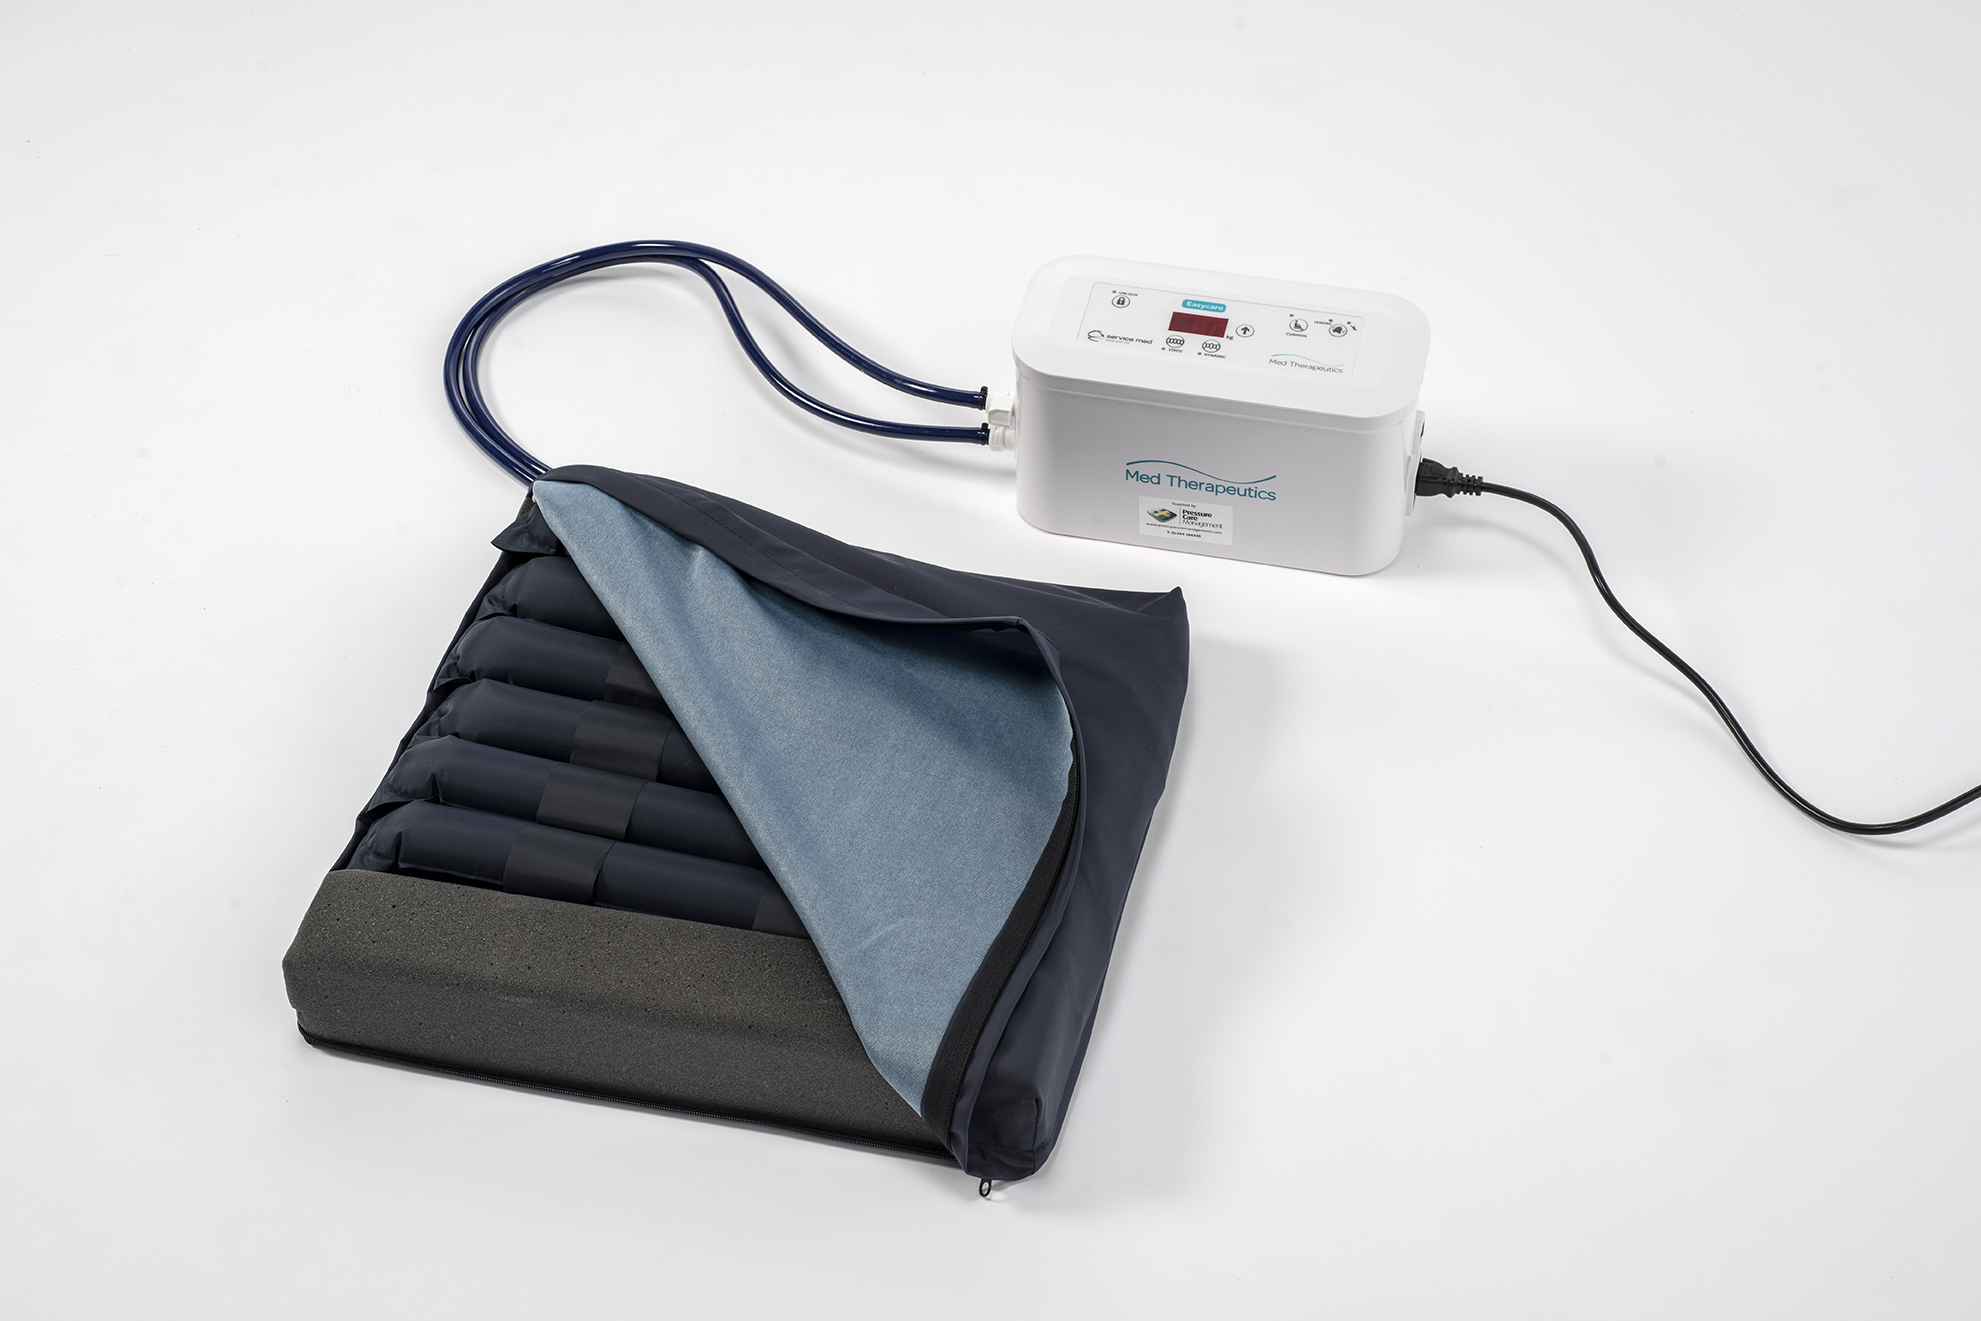 Air Fluidized Therapy: Clinitron Beds for In-Home Wound Healing and Recovery